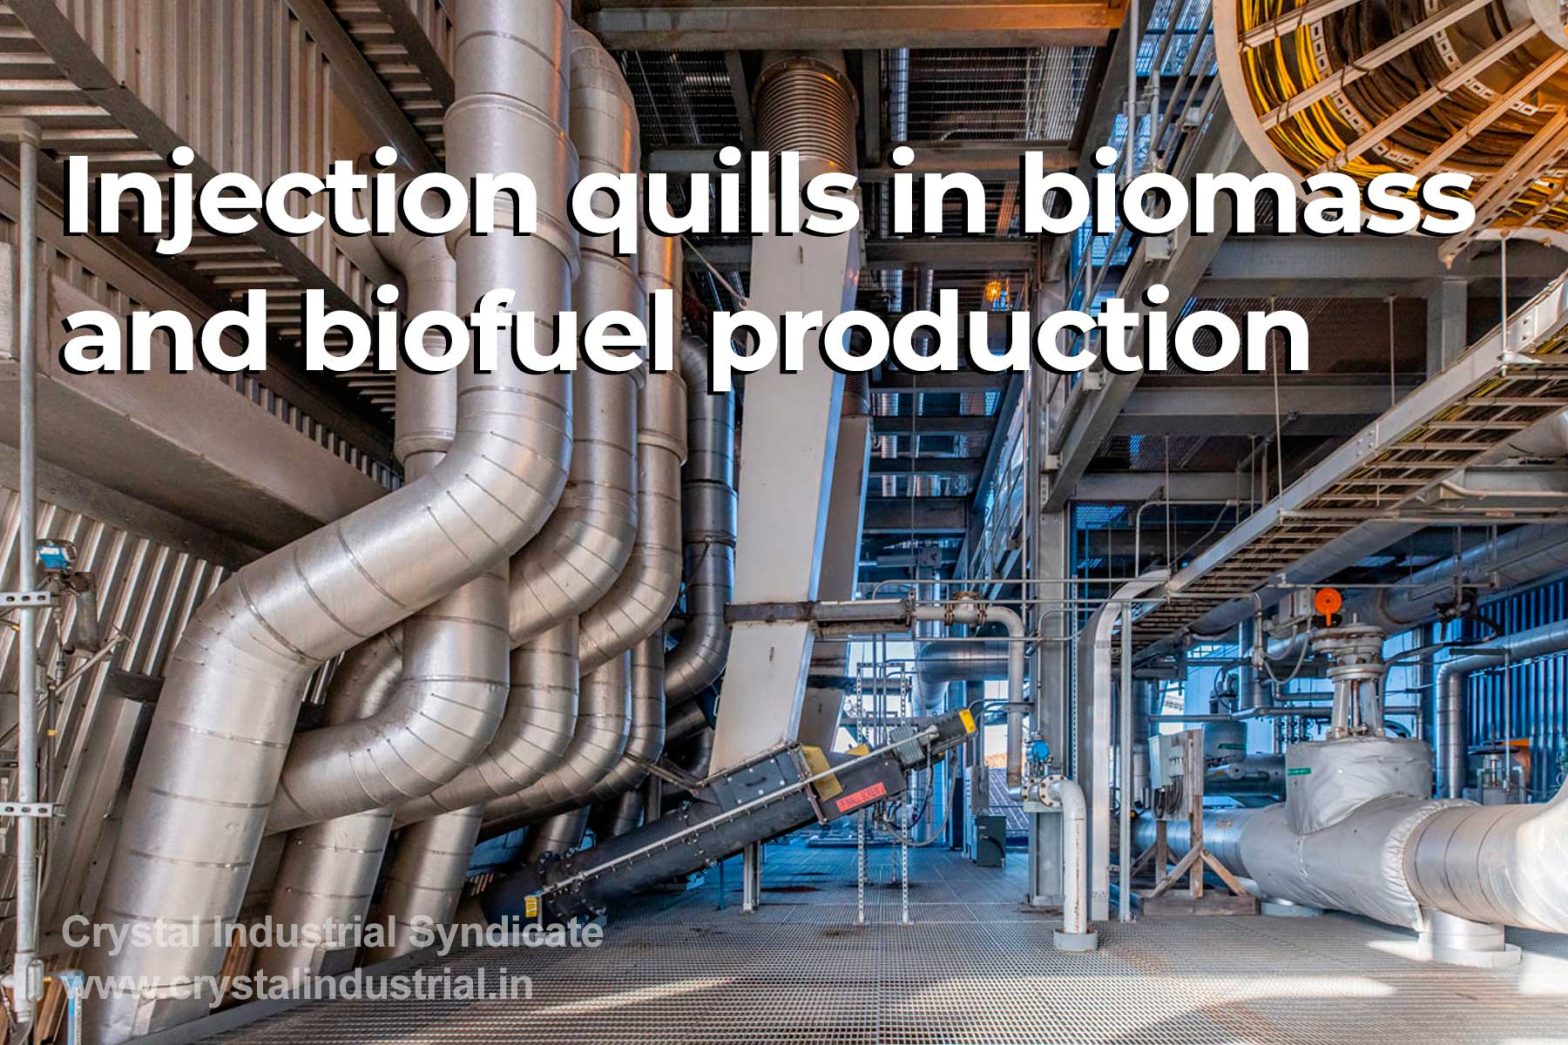 Future of injection quills in biomass and biofuel production